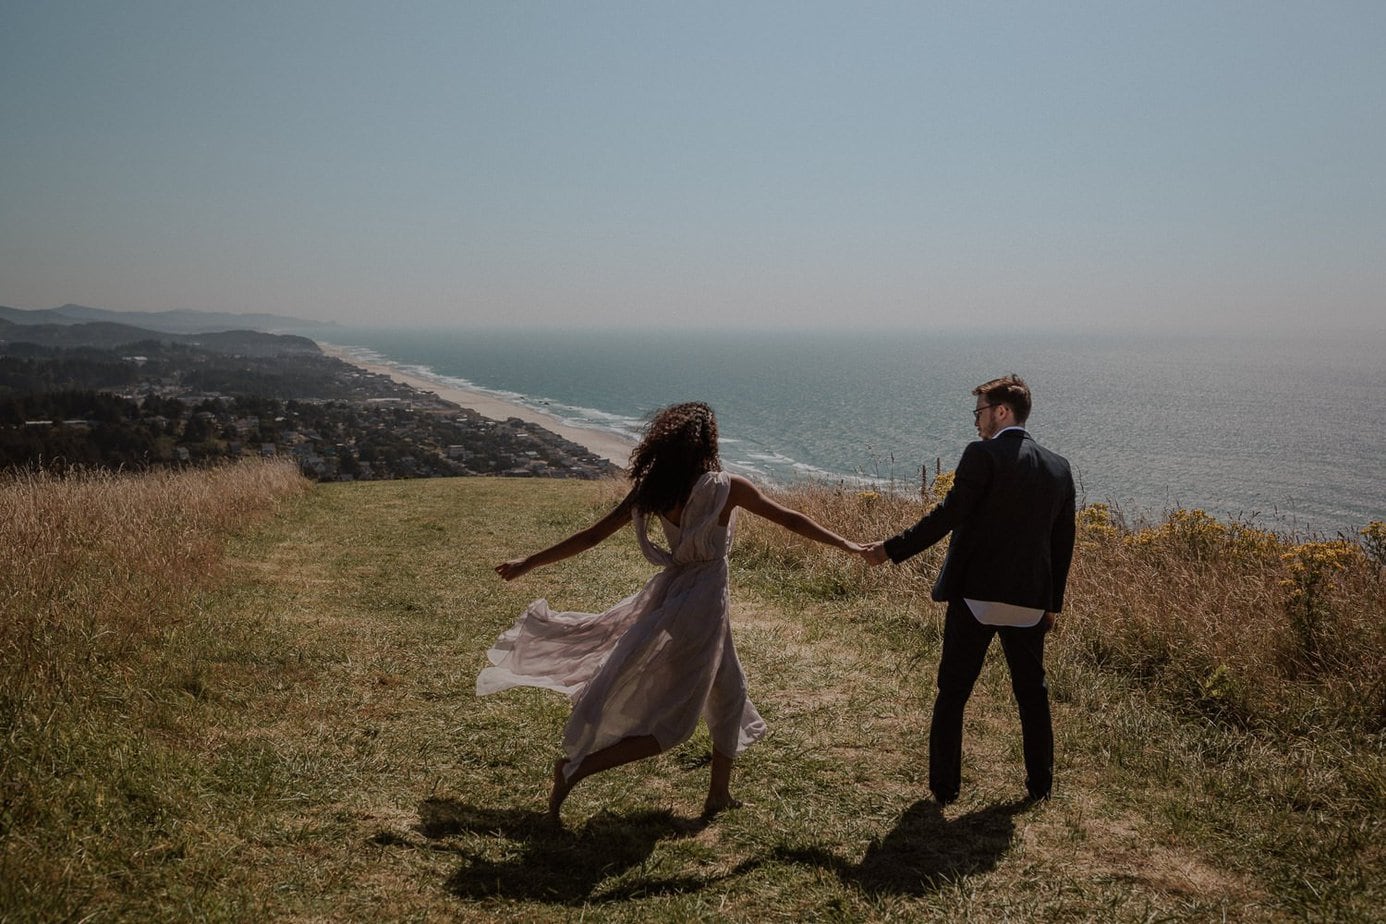 Bride and groom dance on the hillside before their God's Thumb elopement. They loved the adventure of their elopement day on the Oregon coast. Her lavender wedding dress blows in the wind like a fairytale